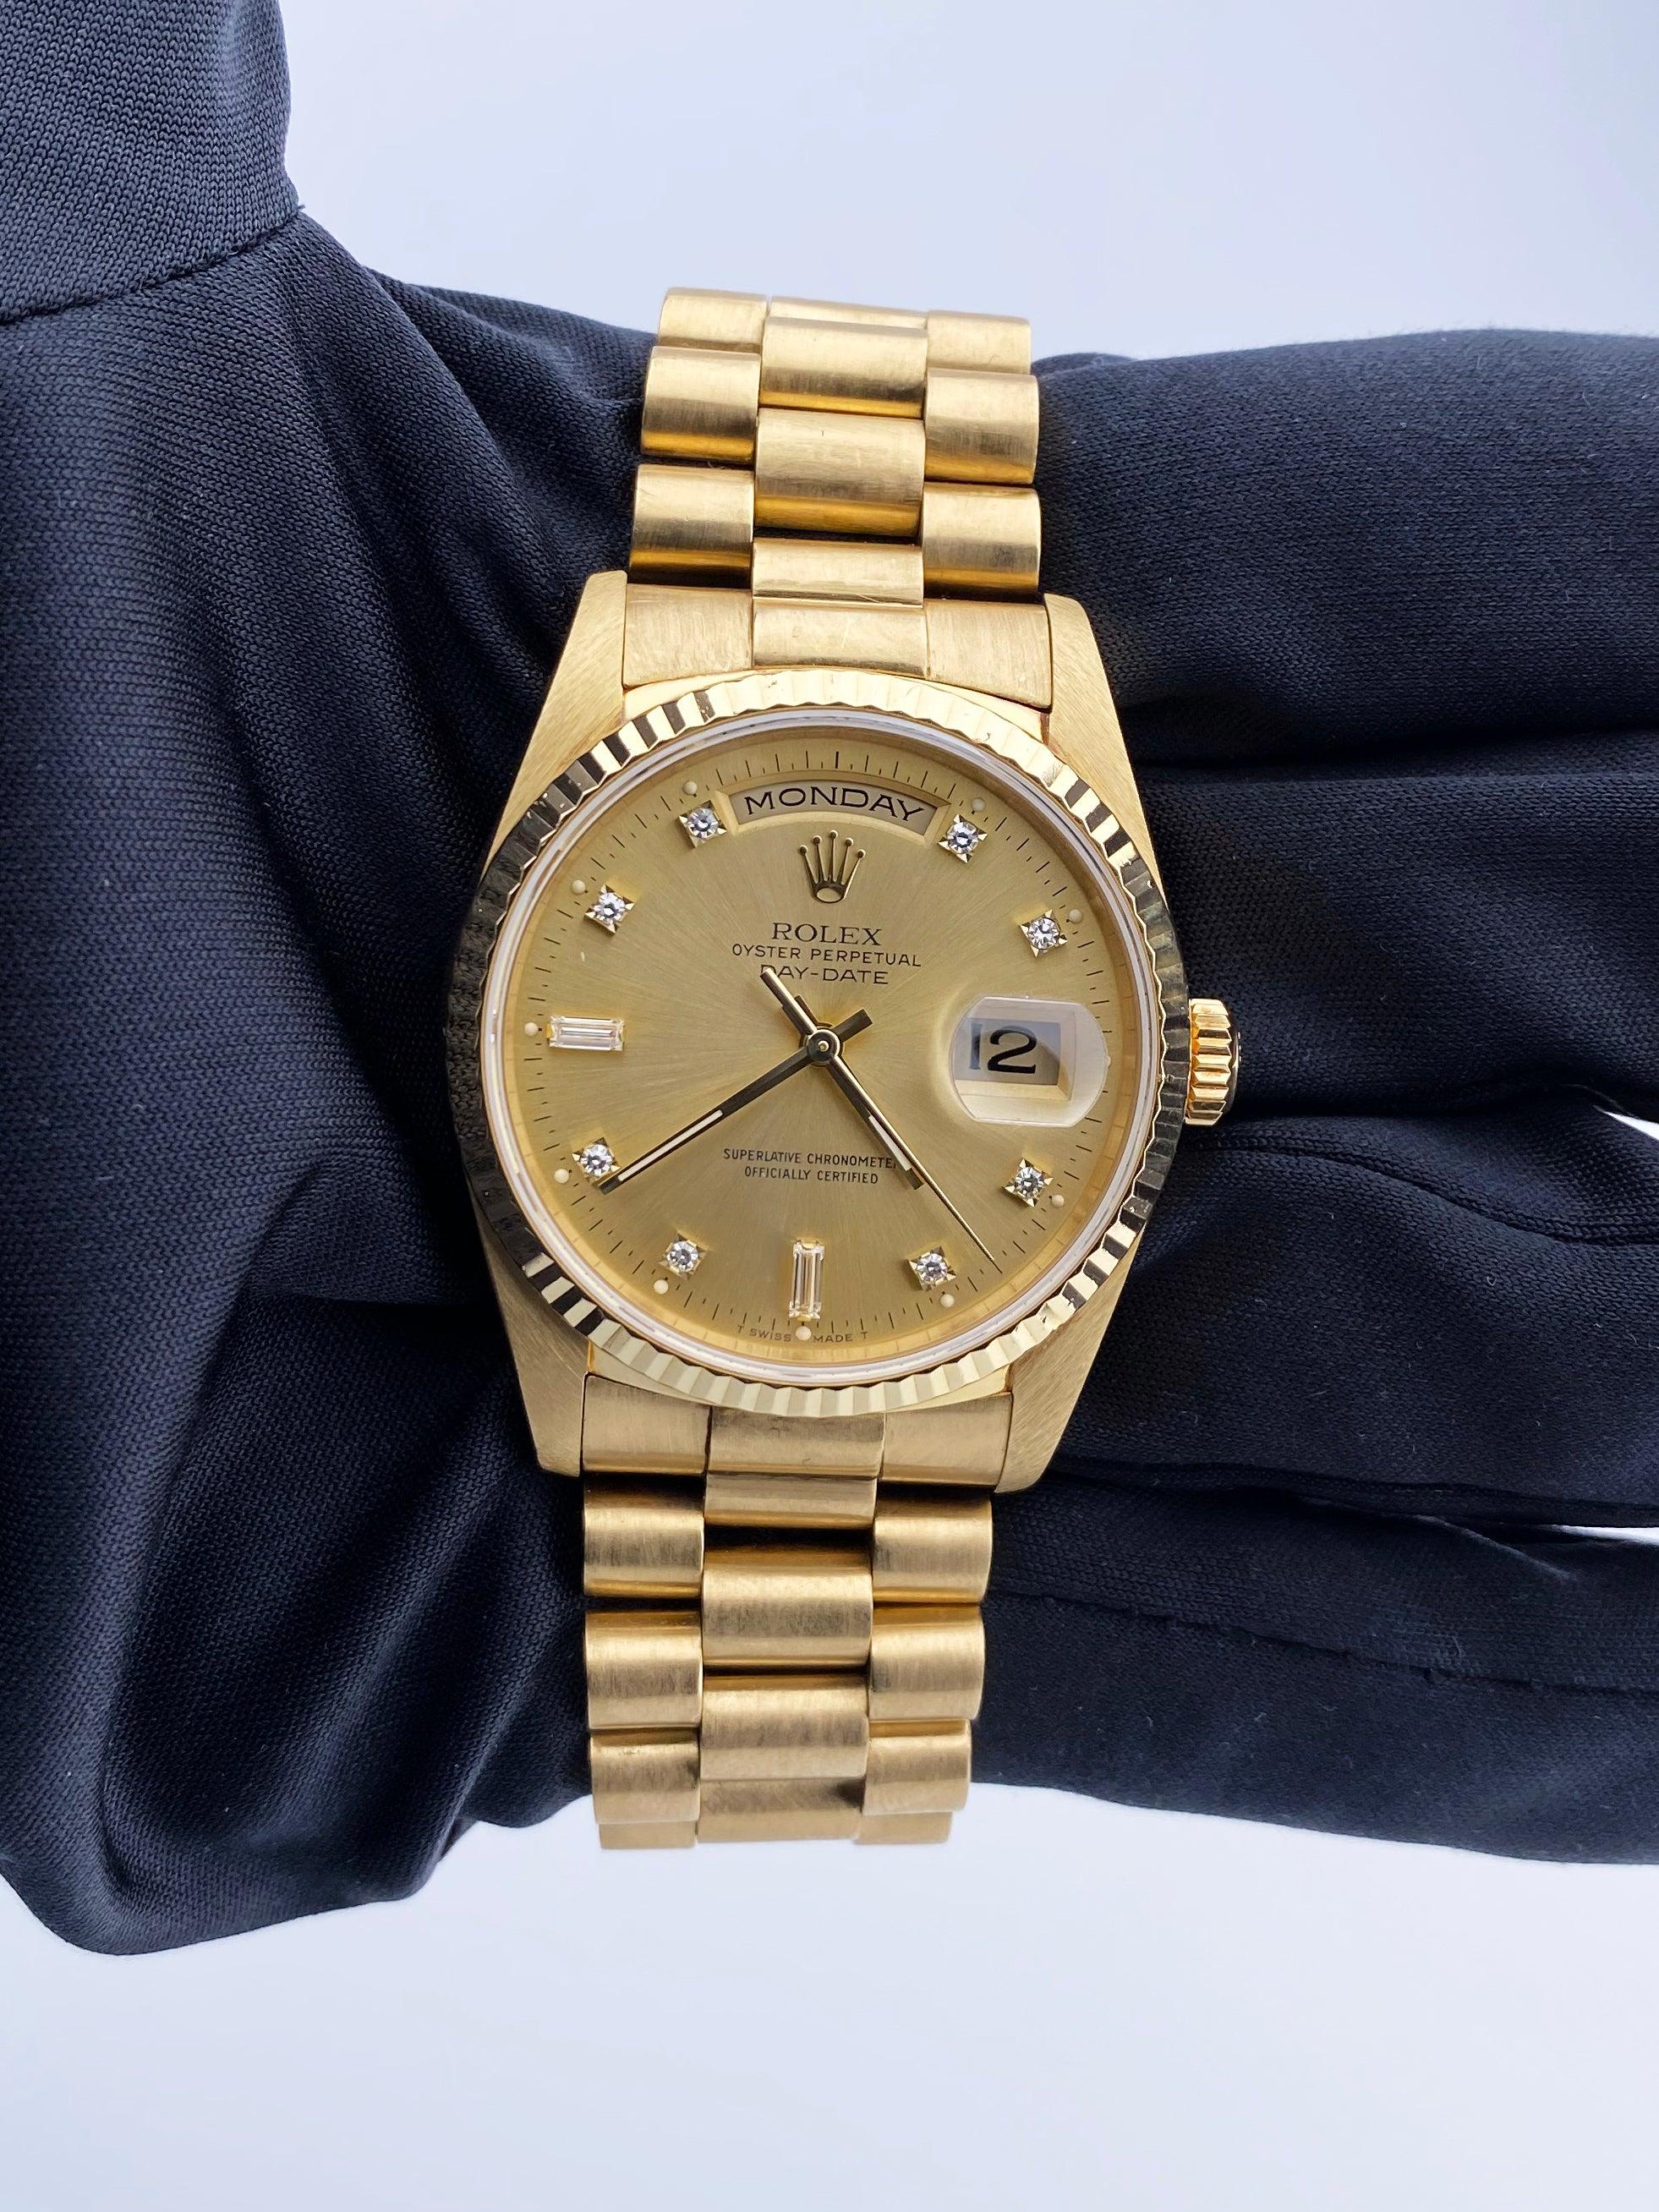 
Rolex Day Date 18238 Mens Watch. 36mm 18K yellow gold case with 18K yellow gold fluted bezel. Champagne dial with gold hands and original factory diamonds set hour marker. Date display at 3 o'clock position and day display at 12 o'clock position.